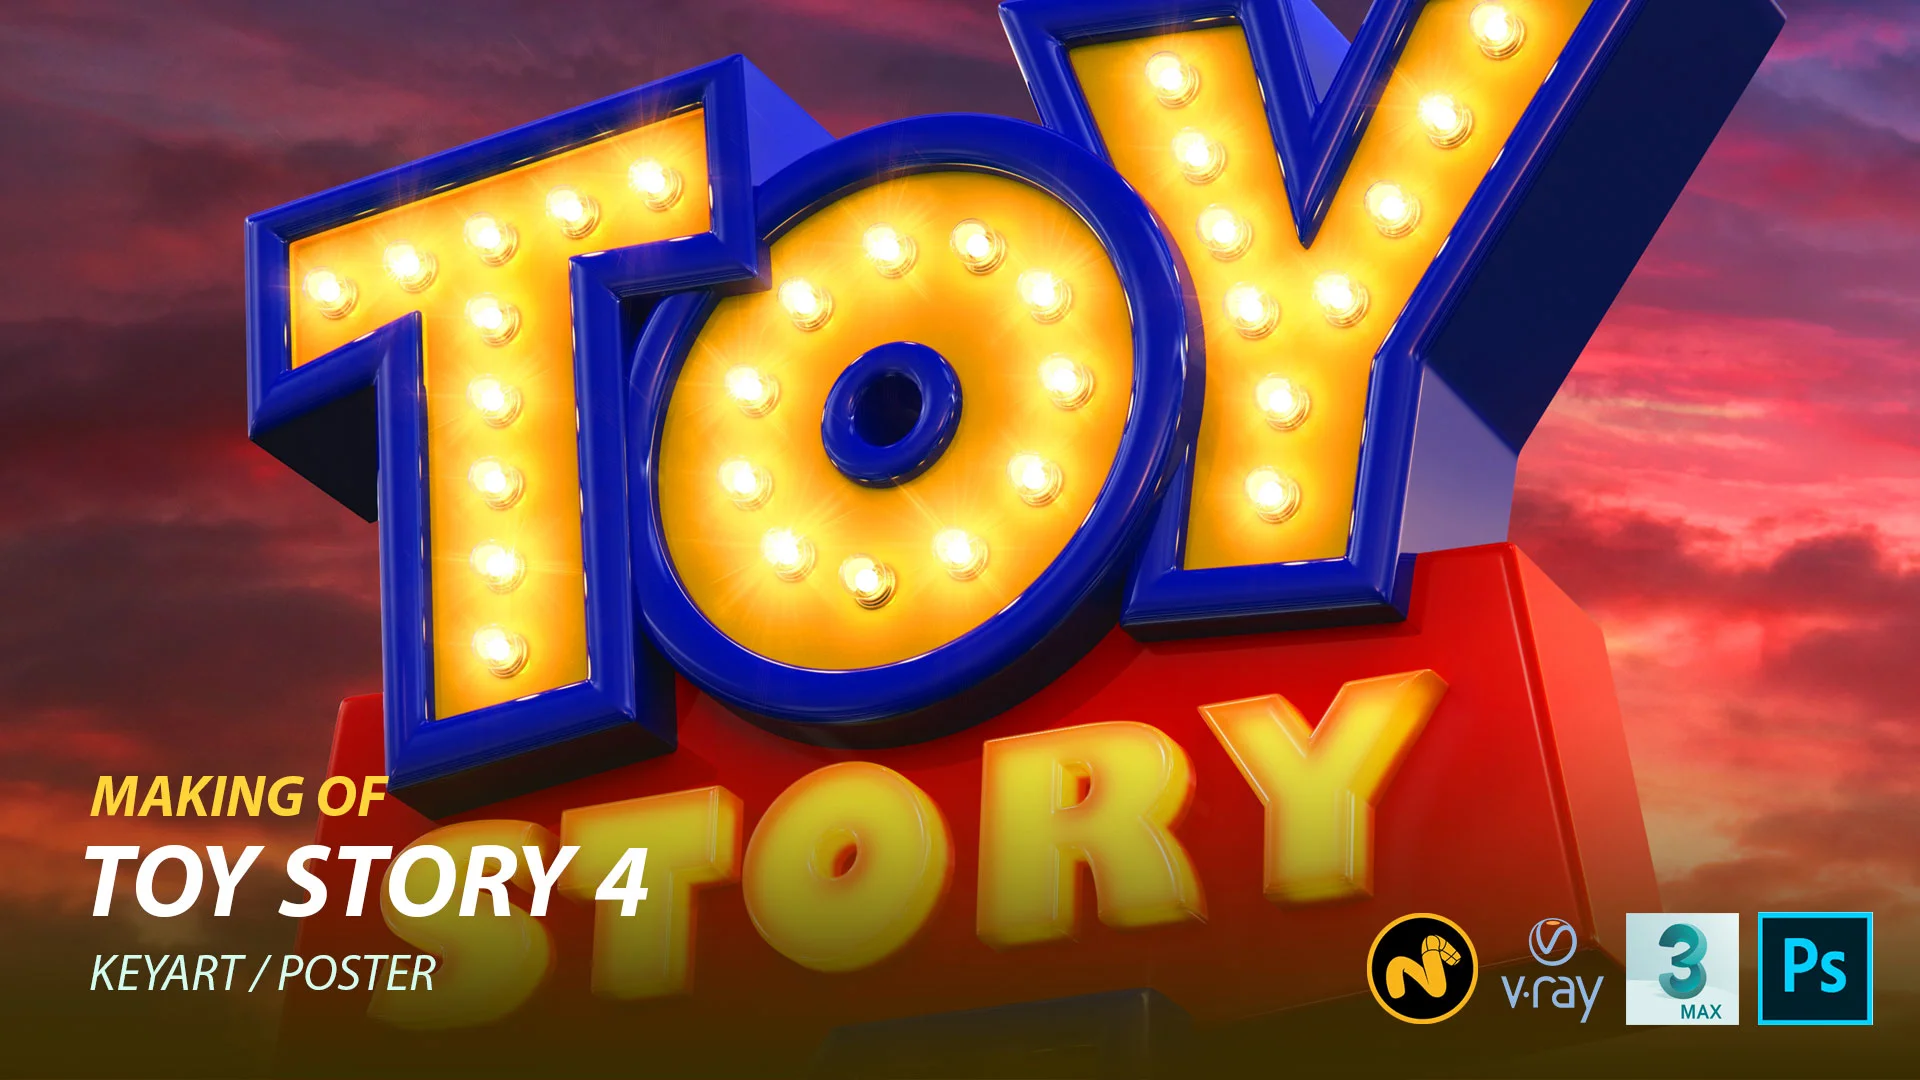 toy story logo clouds